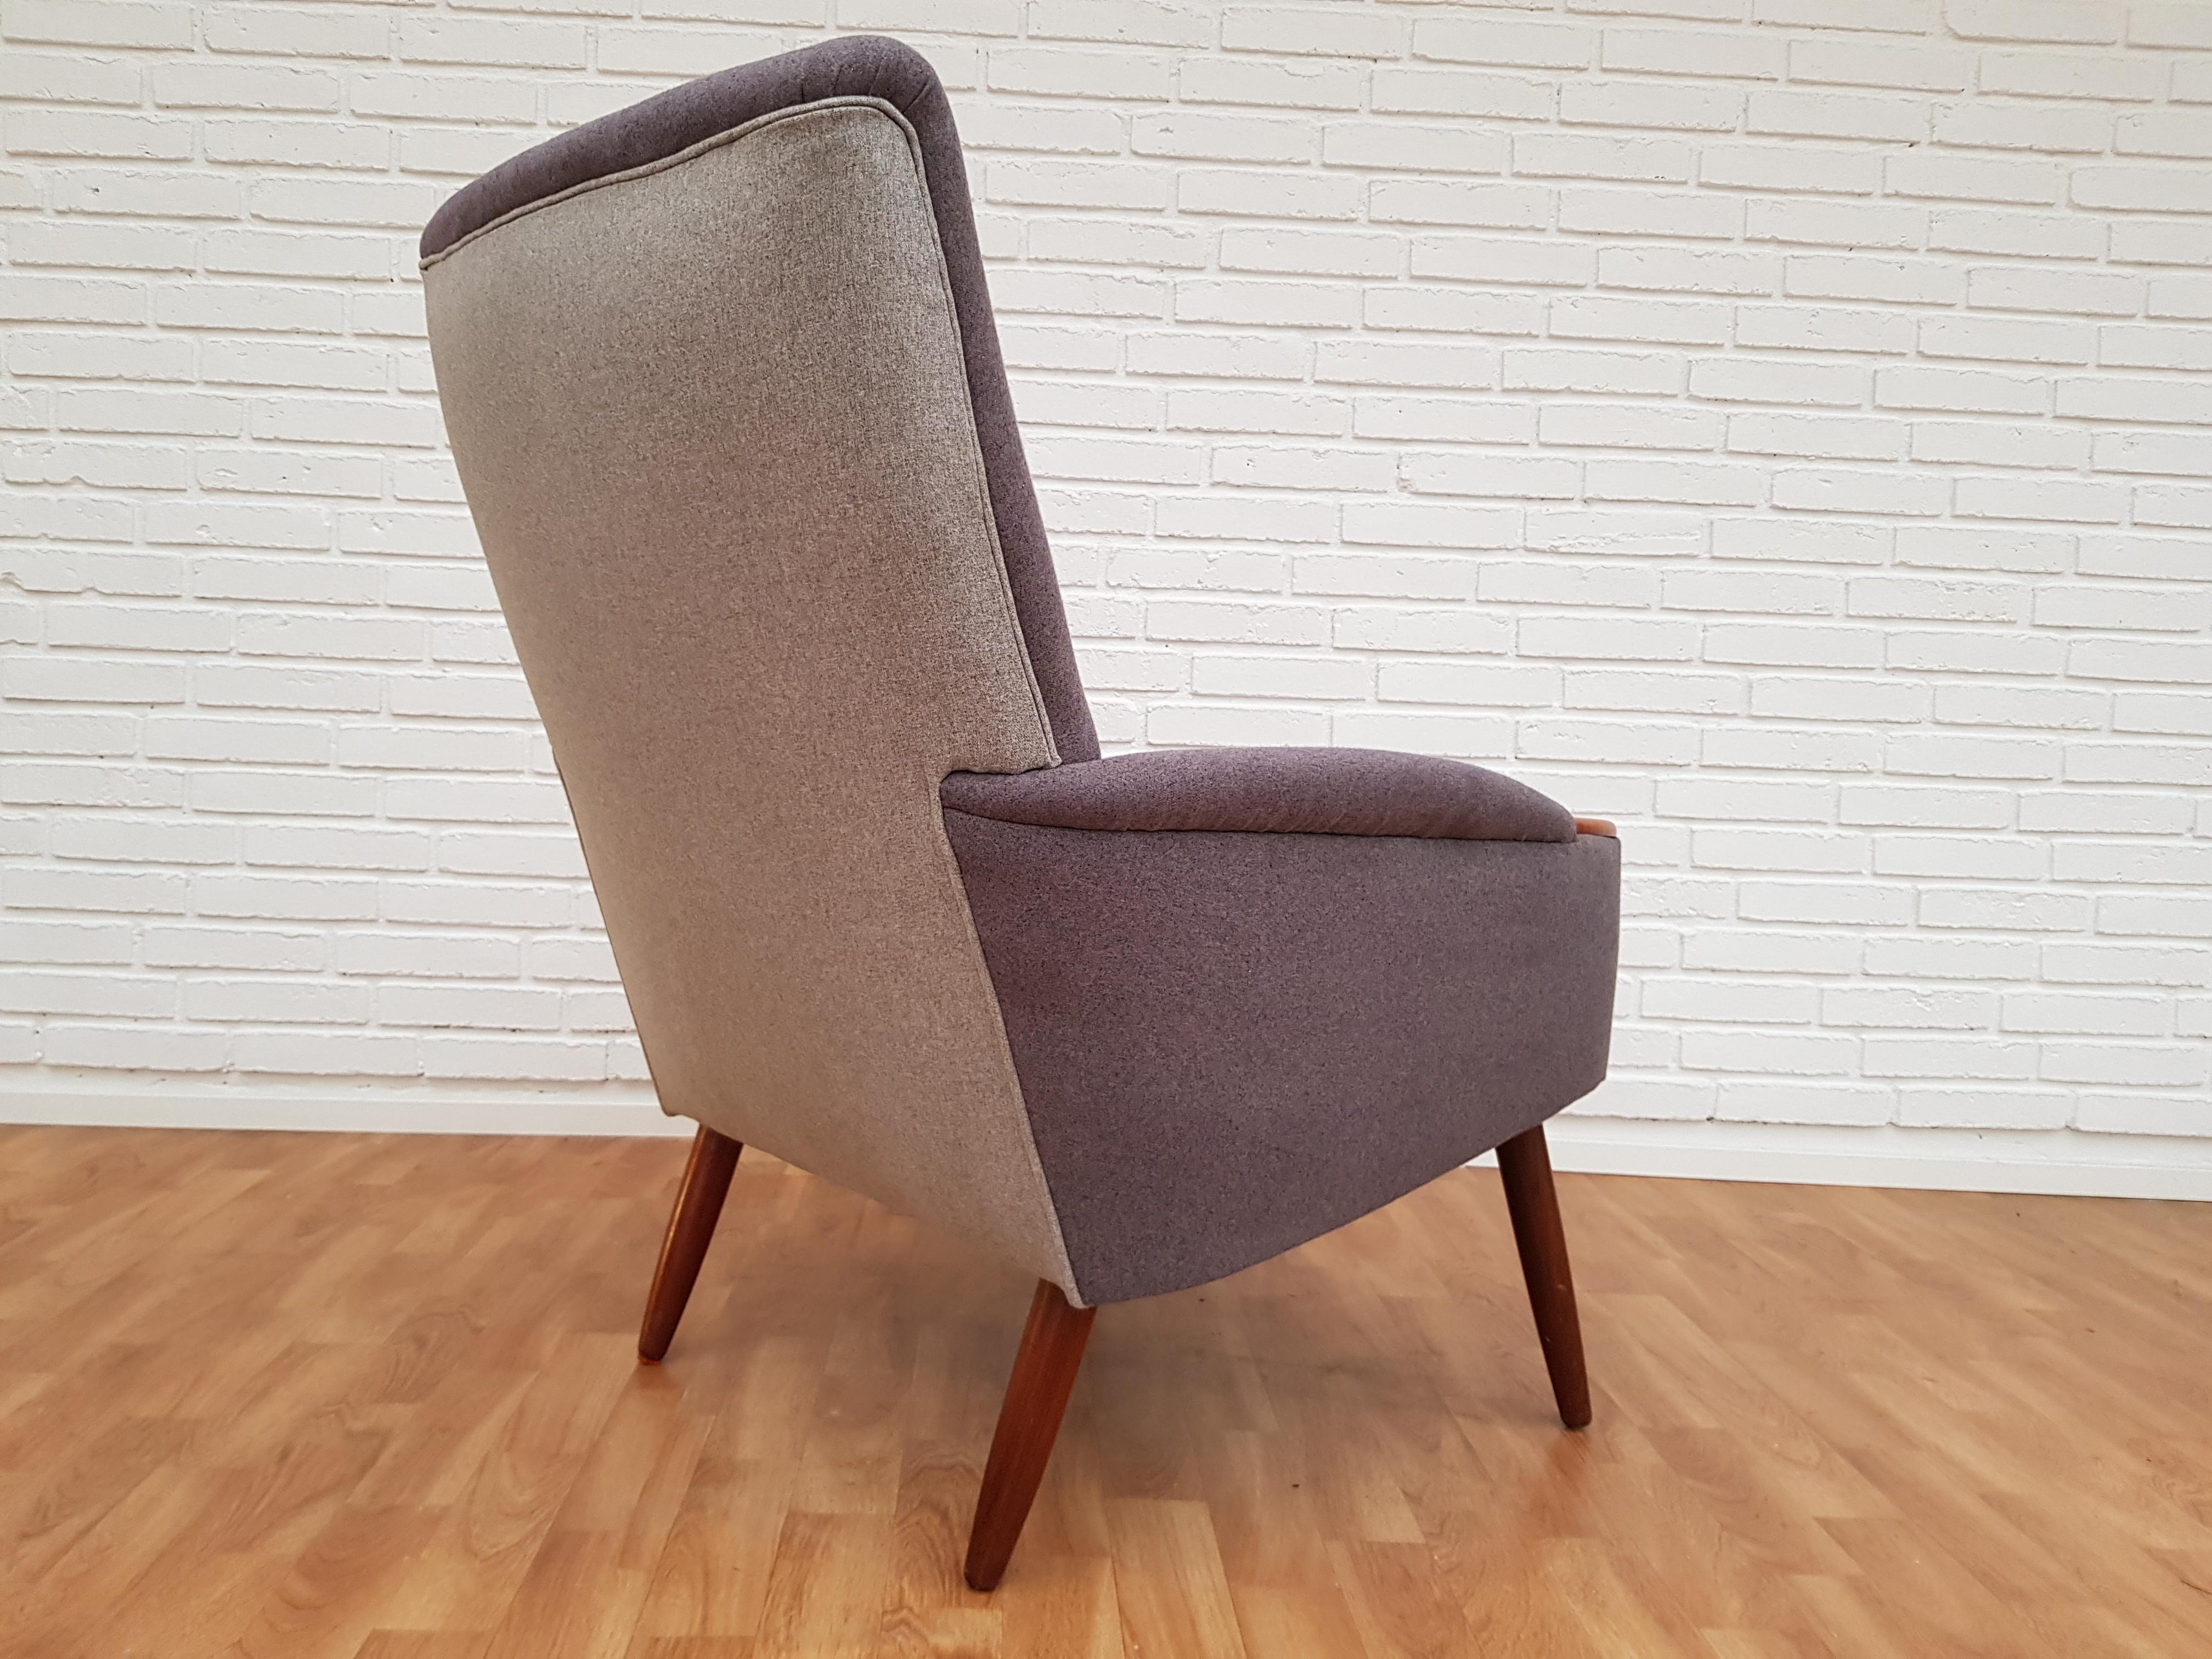 Danish Retro Lounge Chair, Nails and Legs Teakwood, Completely Restored For Sale 3